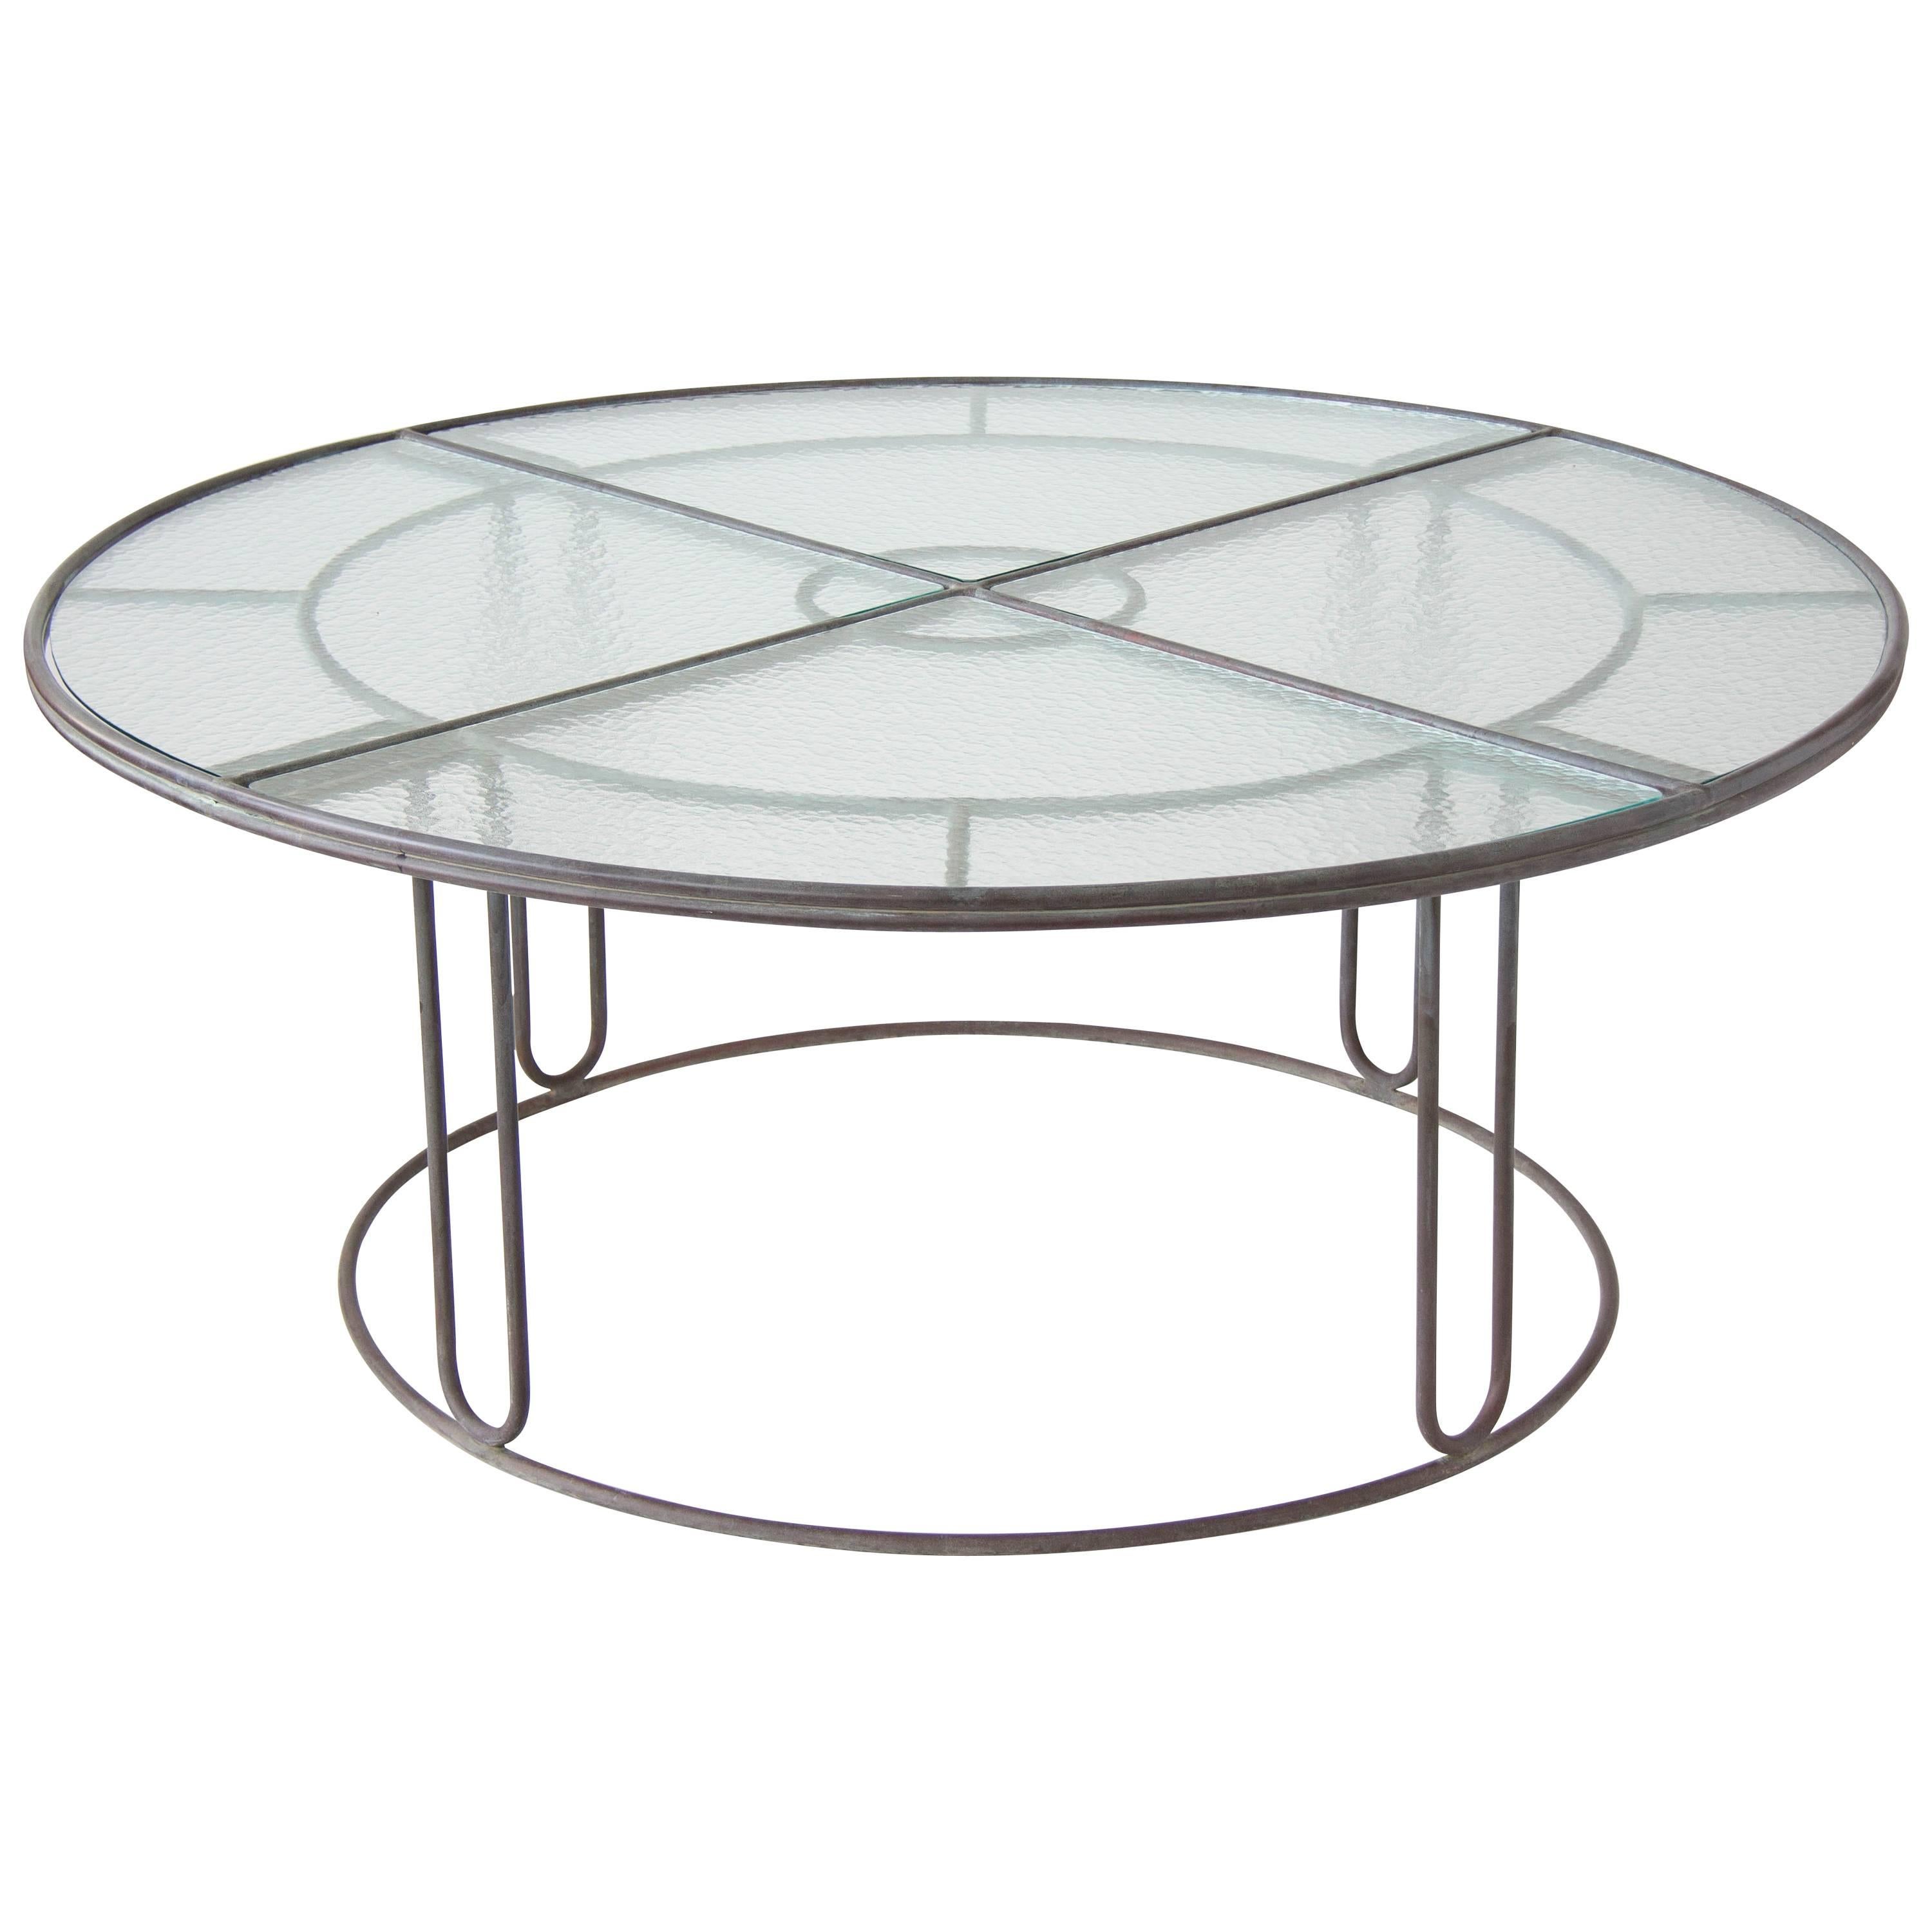 Walter Lamb Bronze Round Dining Table with Hammered Glass Top